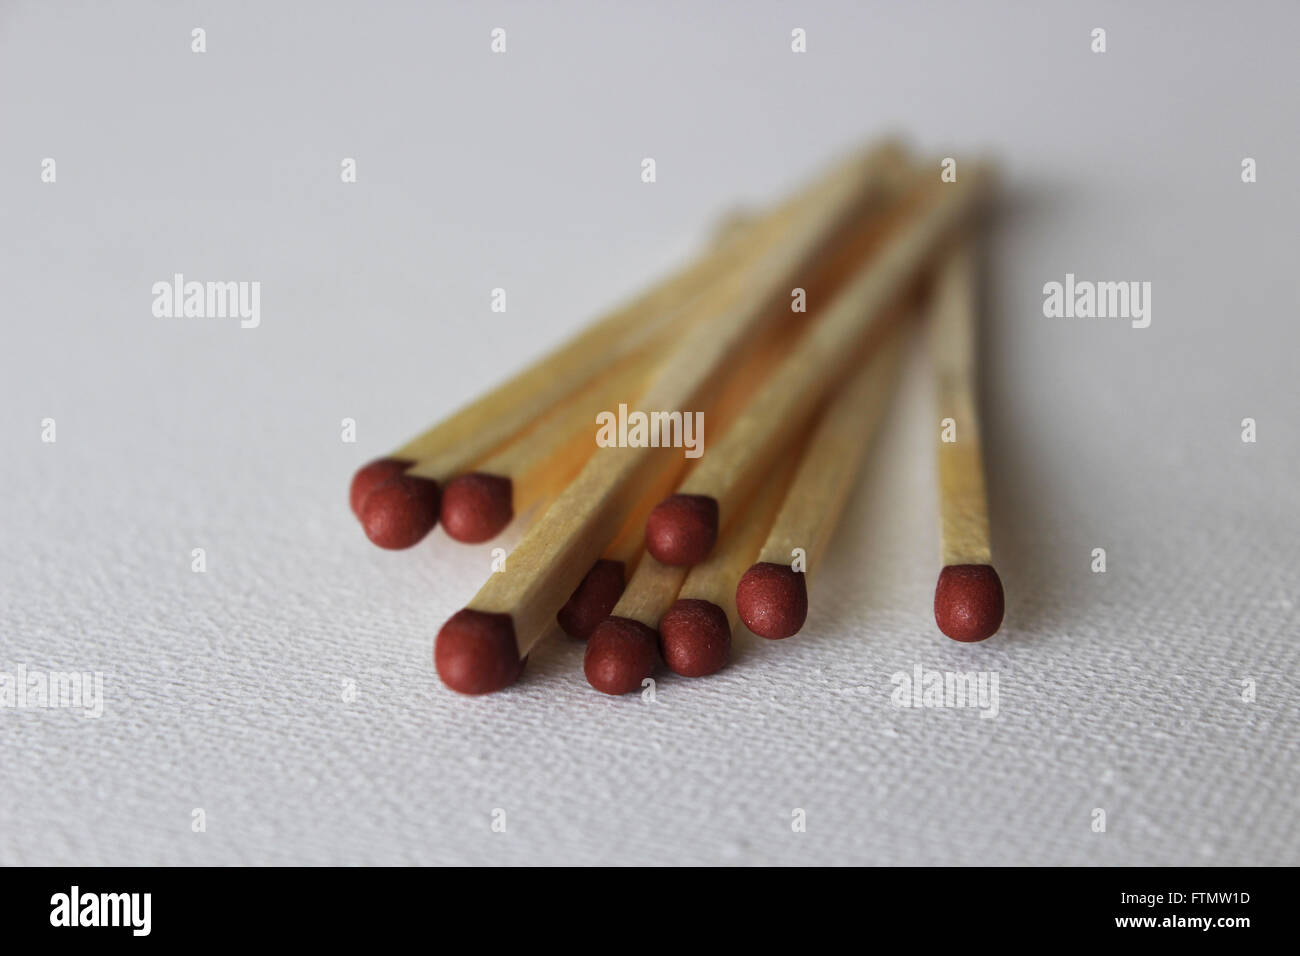 A pile of matches against a white background ready to strike Stock Photo